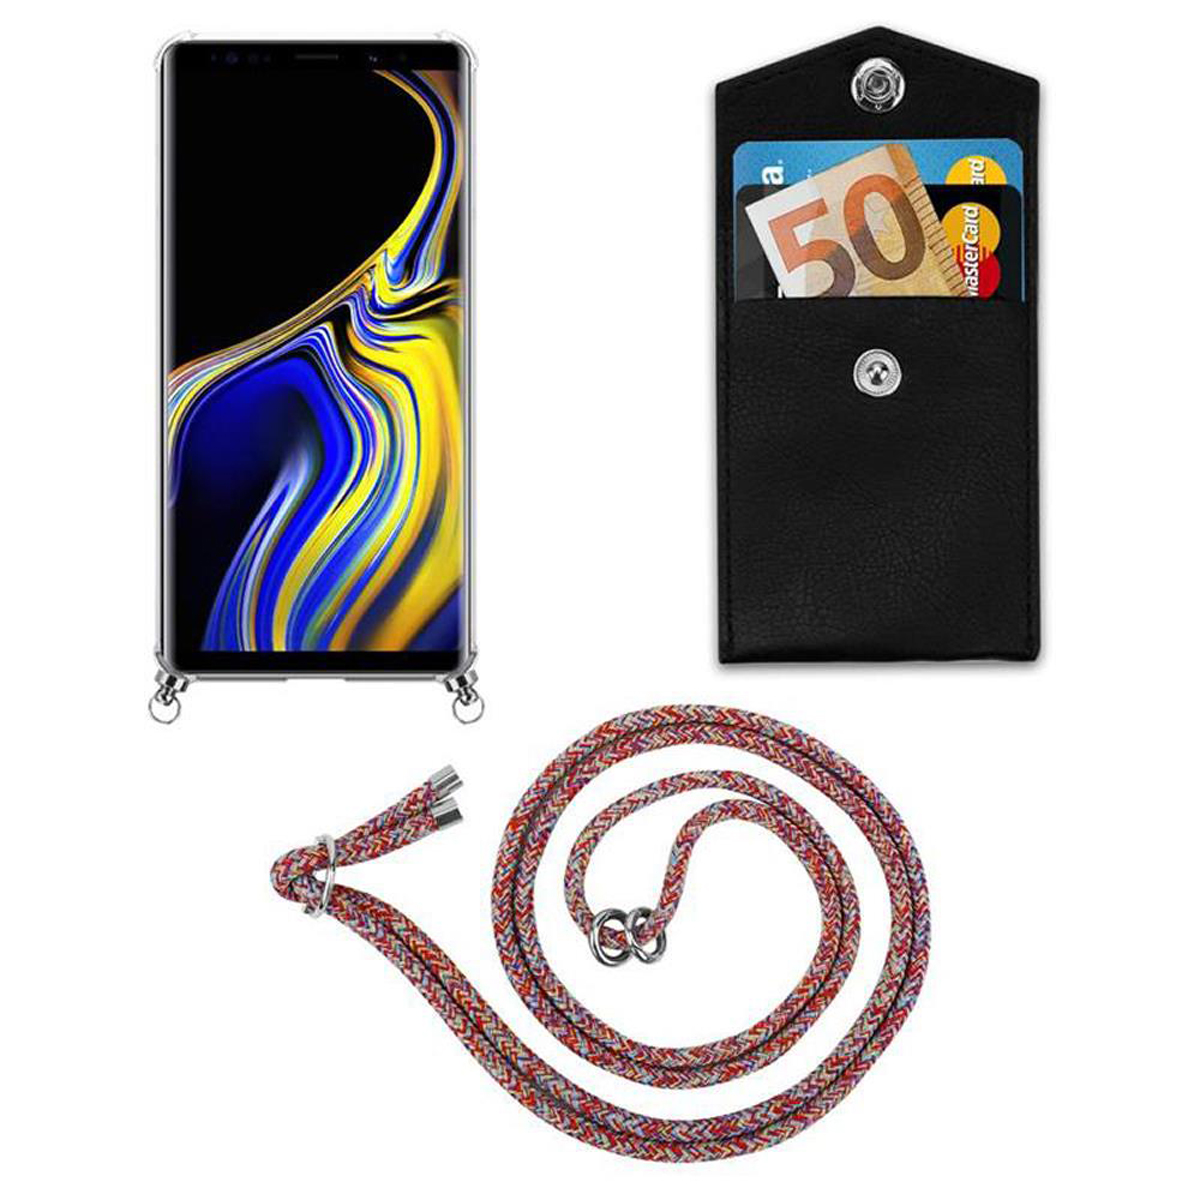 abnehmbarer mit 9, Kordel Band CADORABO und Hülle, Ringen, Handy Backcover, PARROT Silber Samsung, NOTE COLORFUL Kette Galaxy